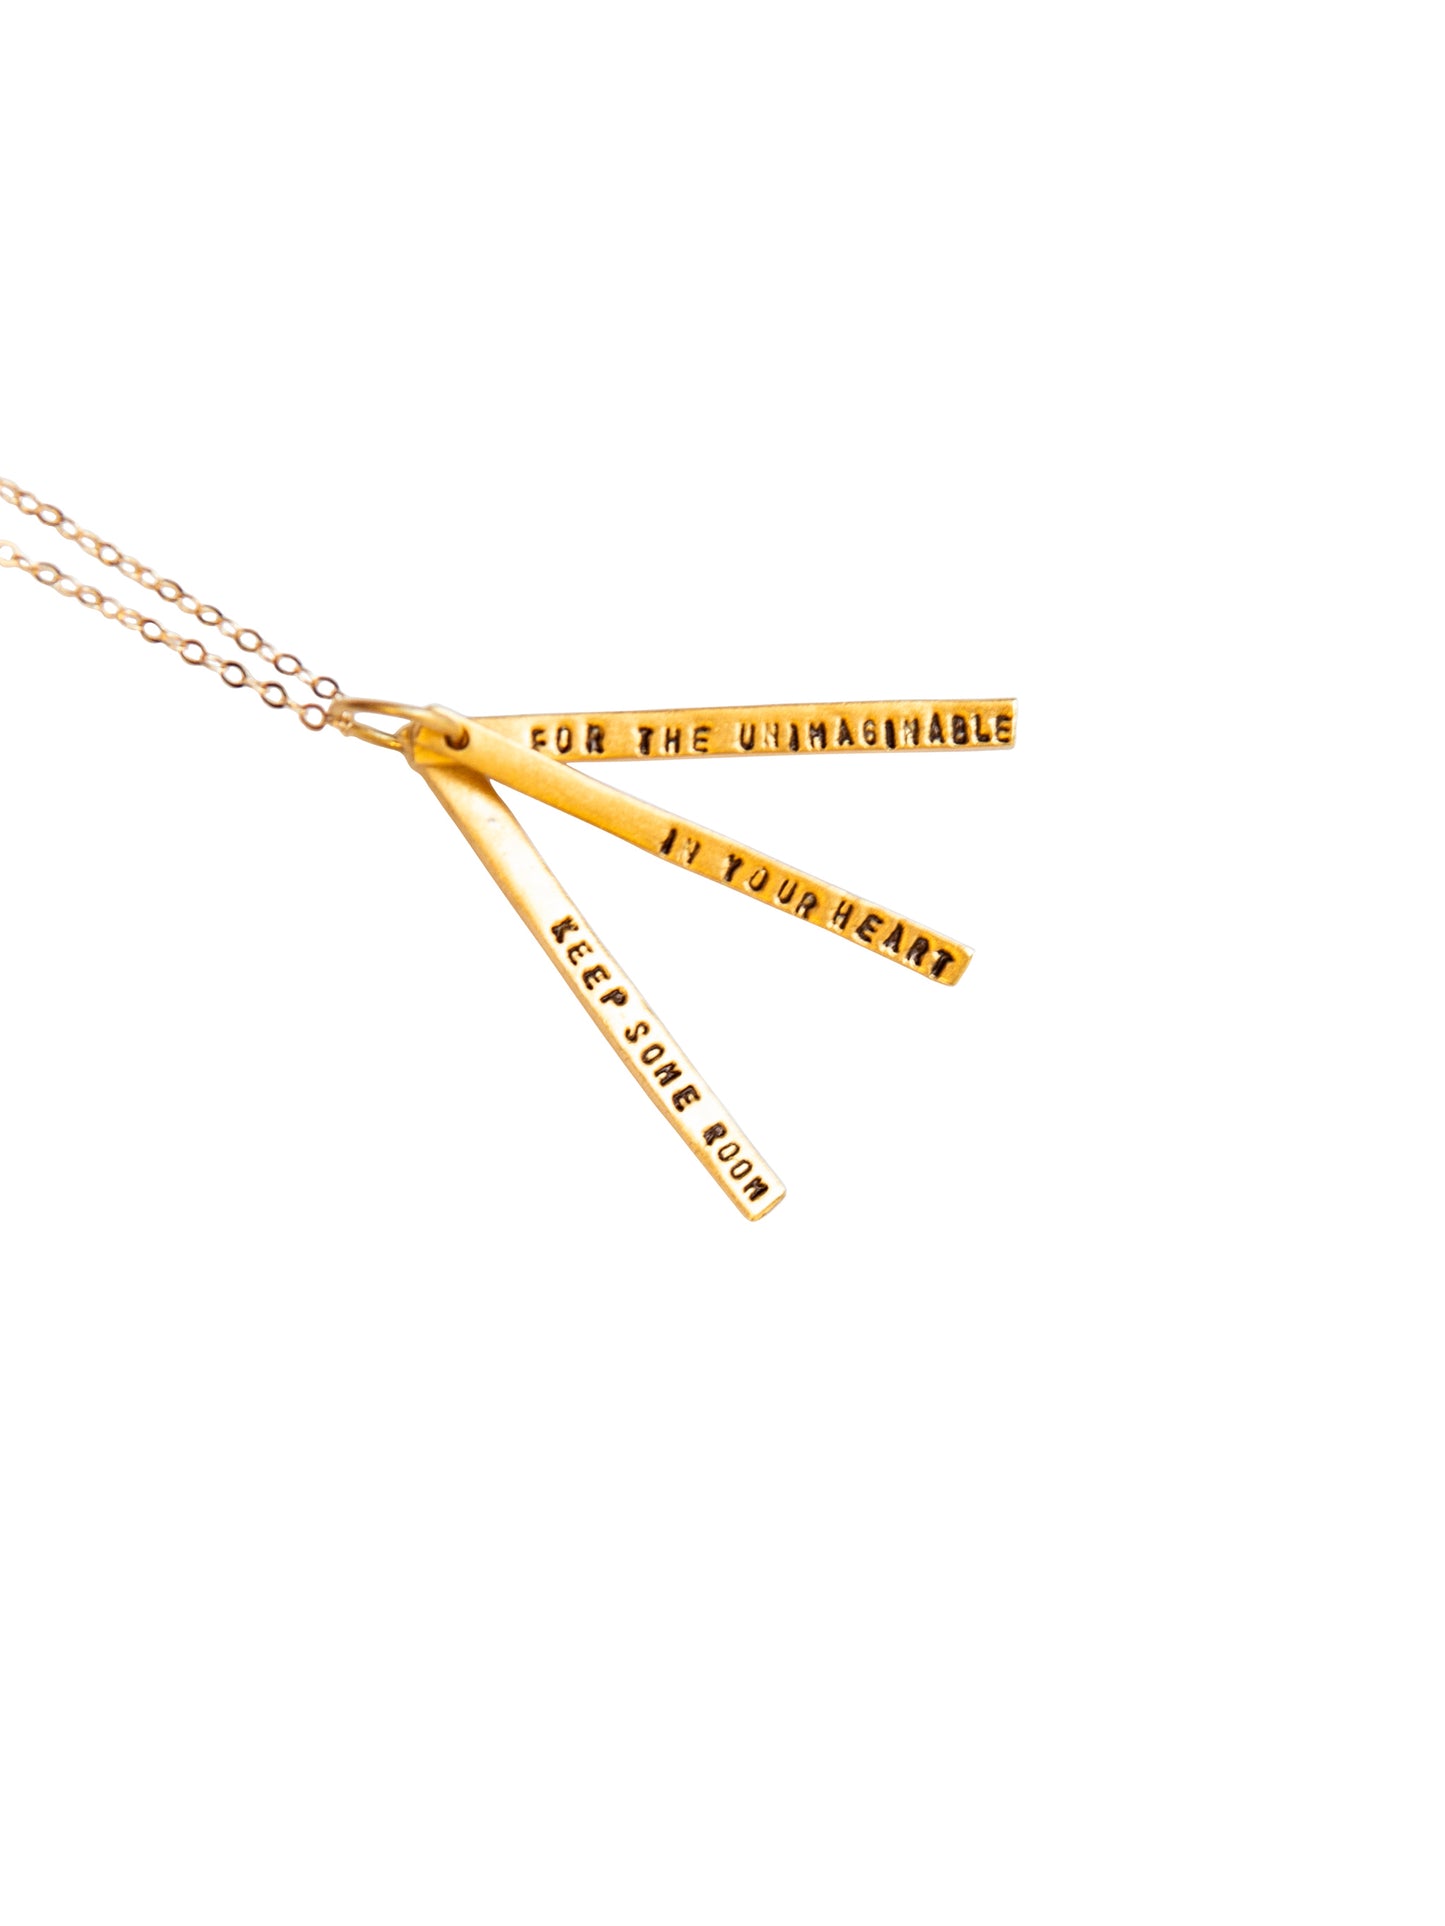 Chocolate & Steel Long-Bar Quote Necklace Mary Oliver Gold Weston Table